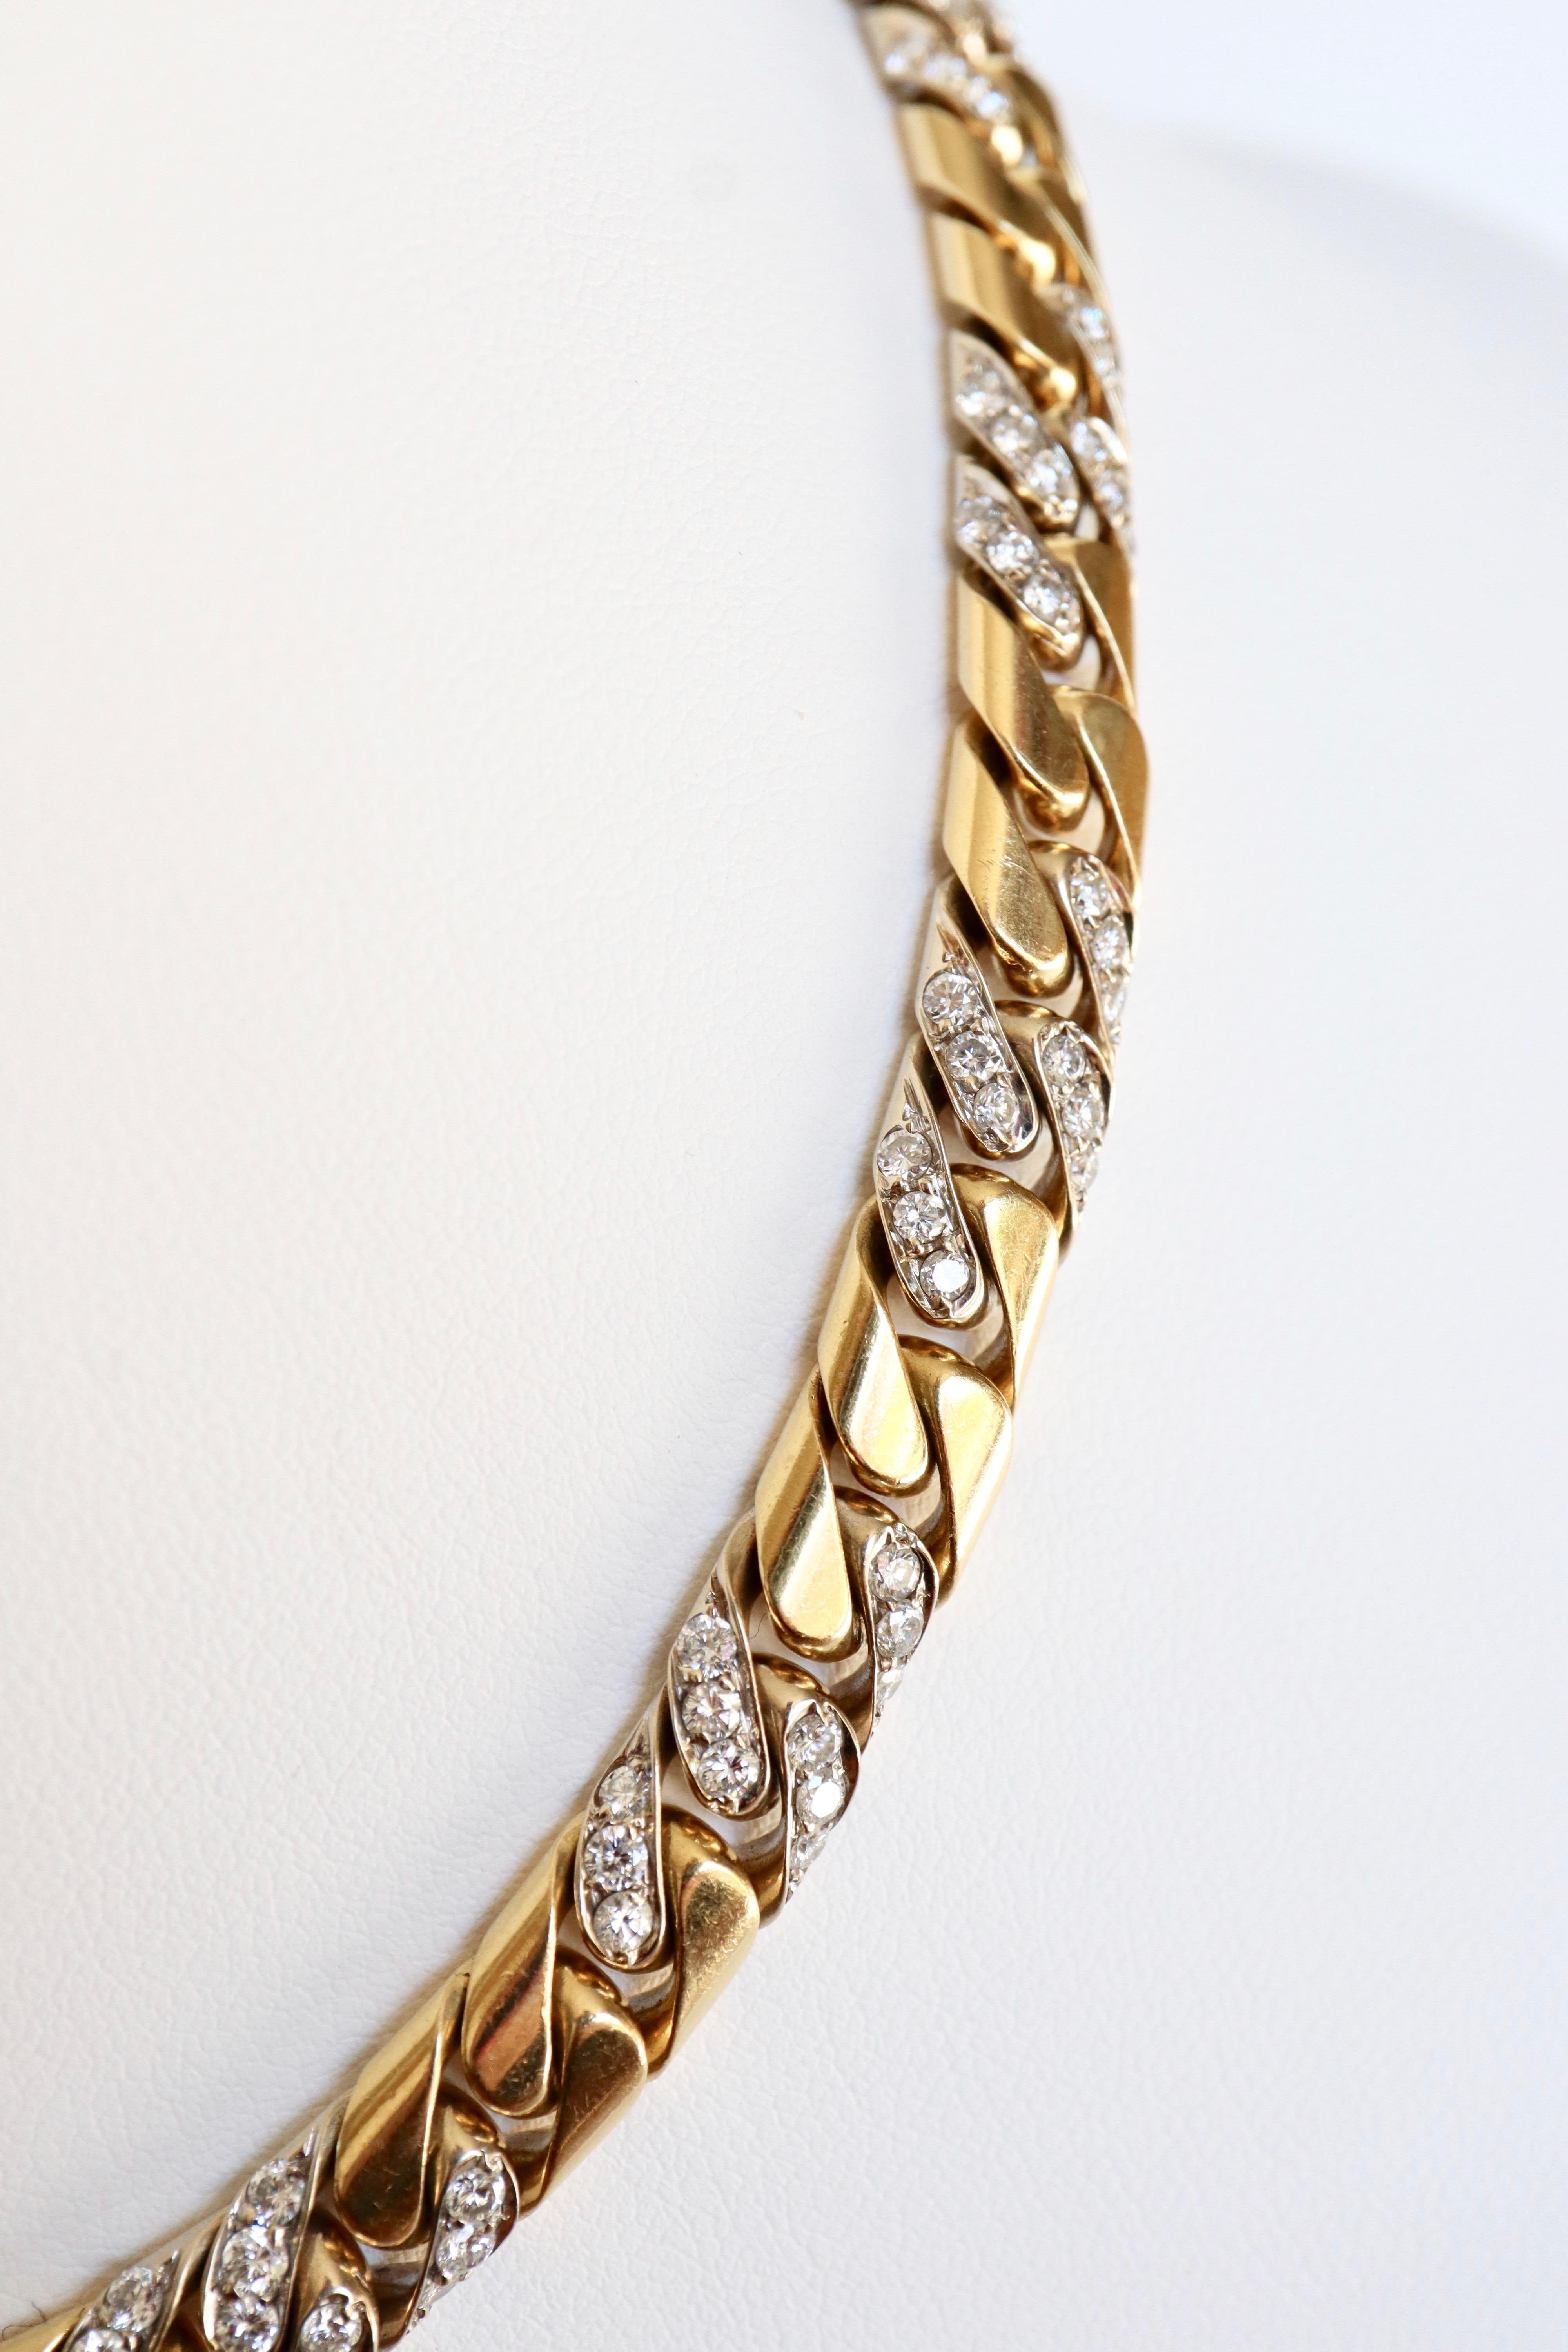 Fred Paris Link Gold Necklace with Diamonds Gold and White 18 Carats Gold 2